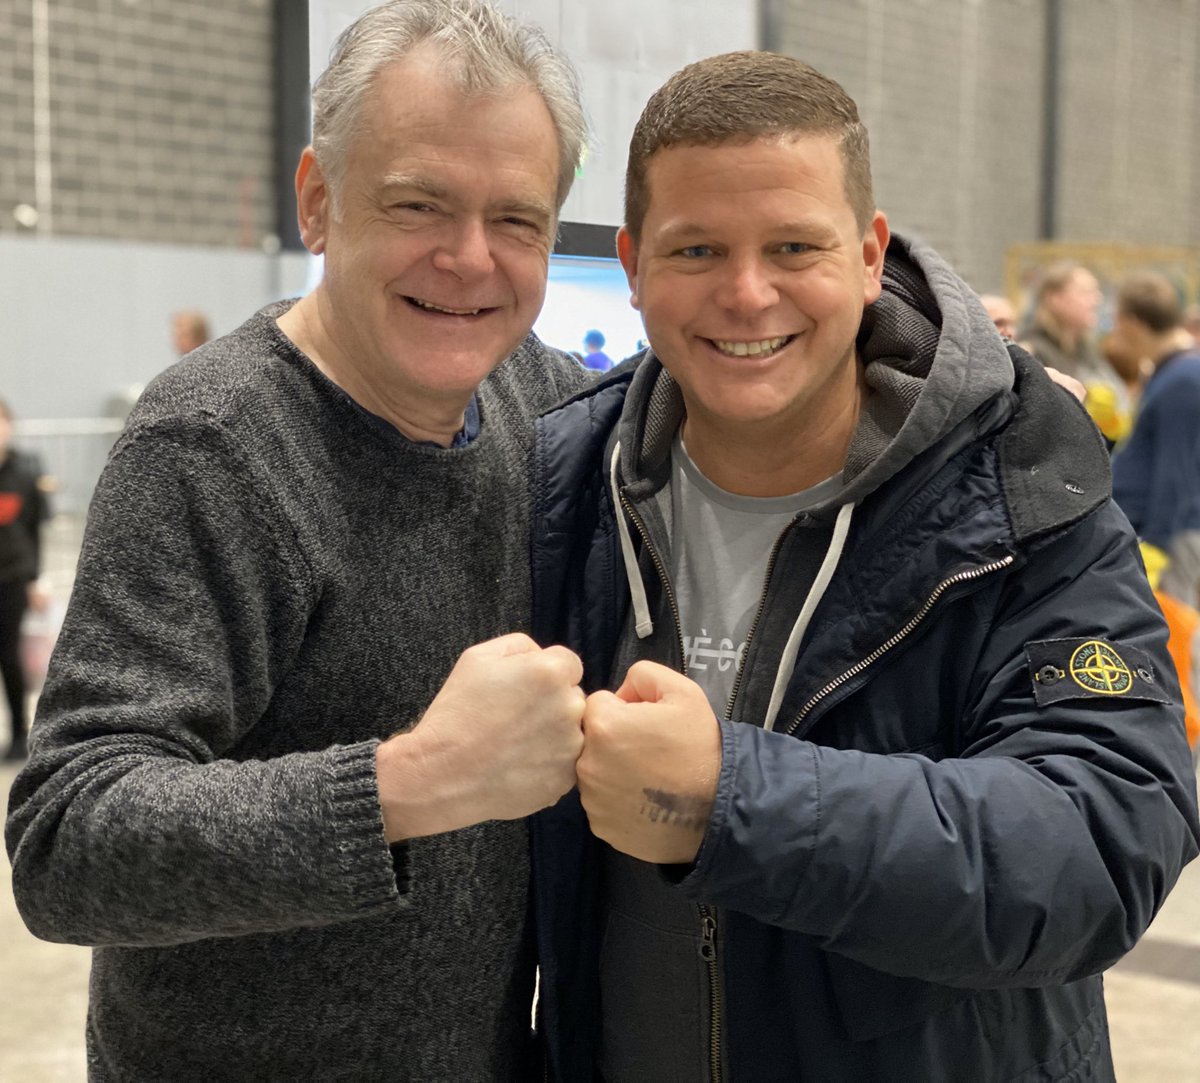 The most lovely person #KevinMcNally from the 🎥 Pirates of the Caribbean movies - with #coronavirus its all about the #fistbump 👊 #PiratesoftheCaribbean